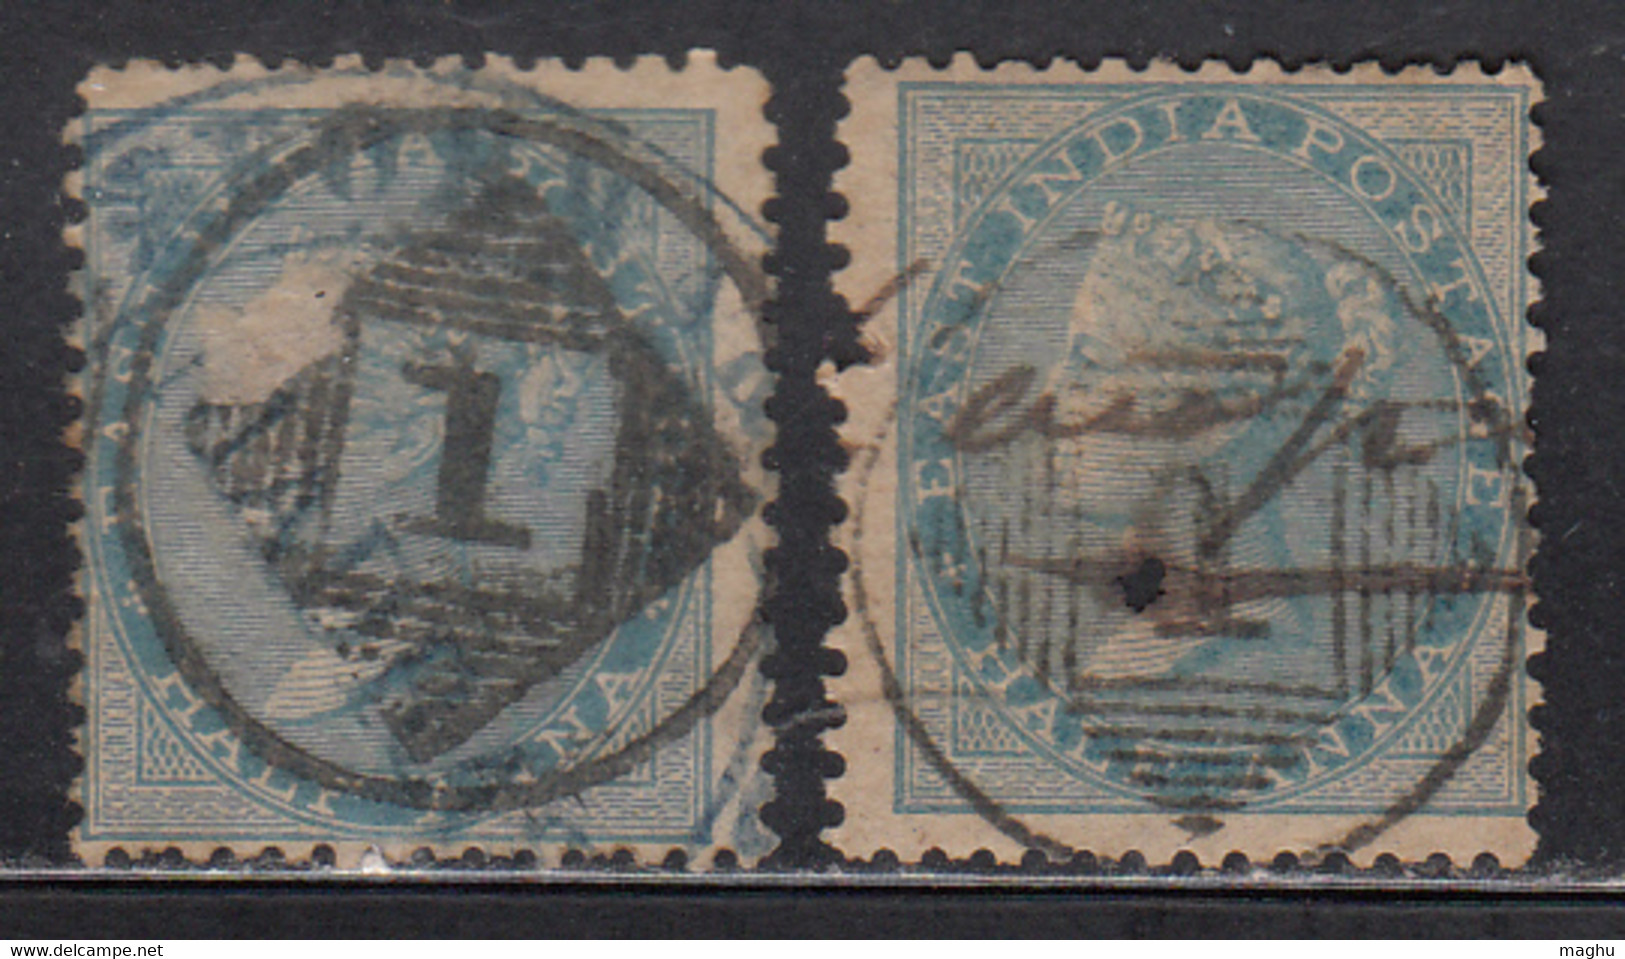 '1' Madras X 2 Diff. Varity Madras Circle/ Cooper / Renouf Type 9, British East India Used, Early Indian Cancellations - 1854 Britse Indische Compagnie